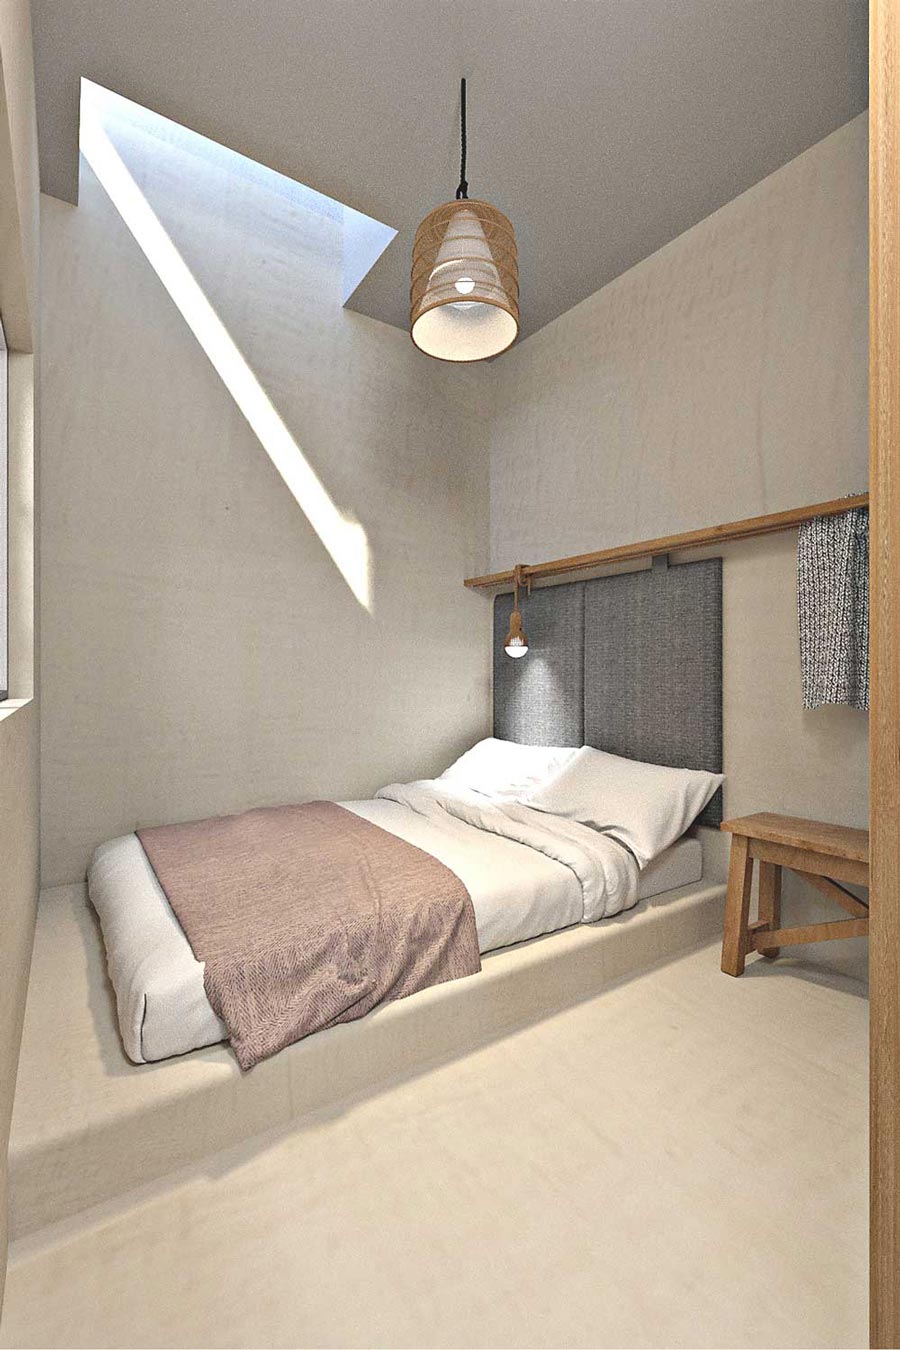 In this cute bedroom the light comes from an internal window and a dormer one.